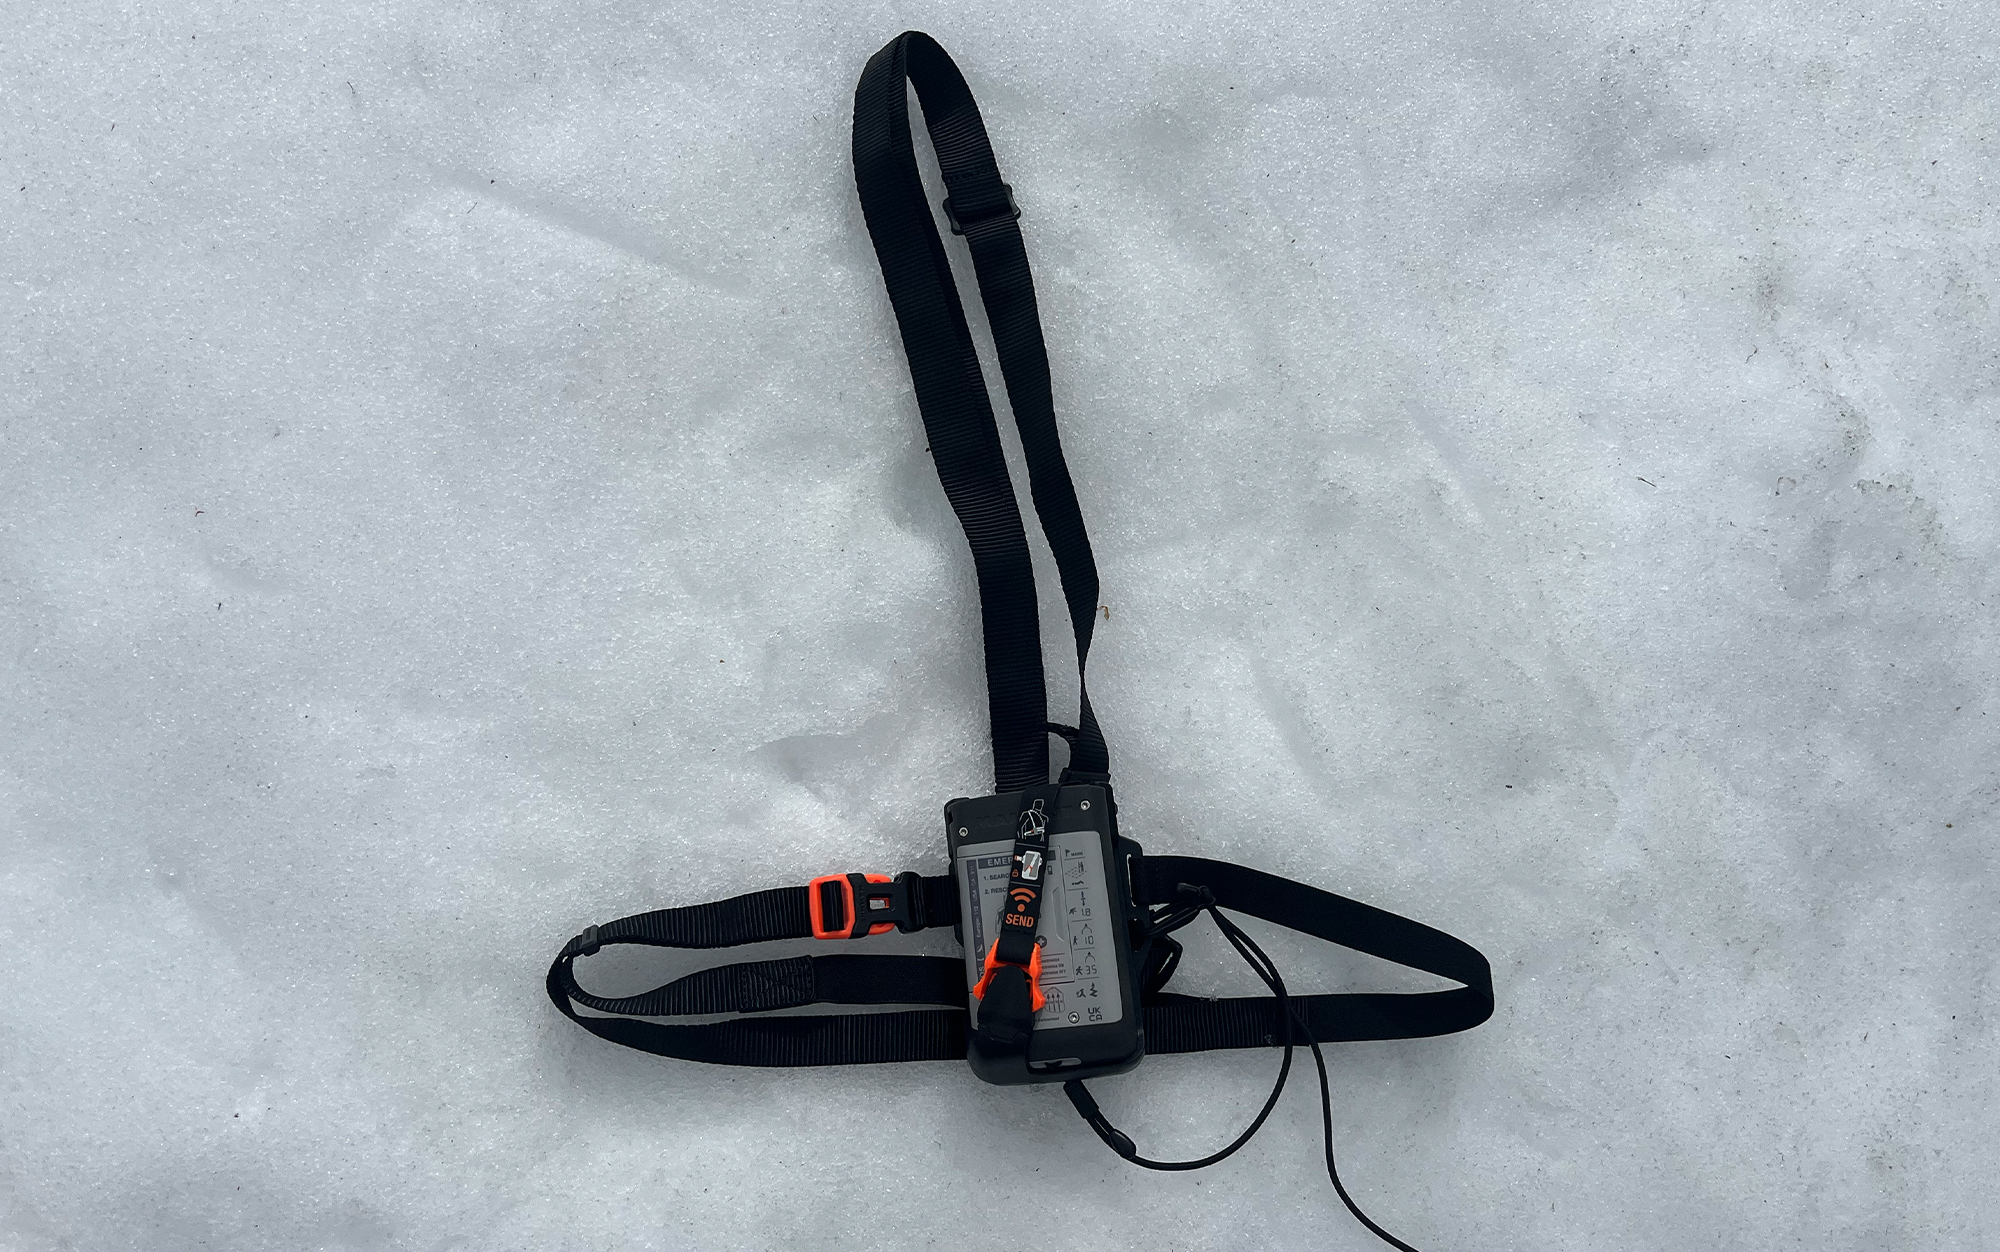 The Barryvox harness' hard case and out-of-the-way lanyard make it durable and convenient to wear.